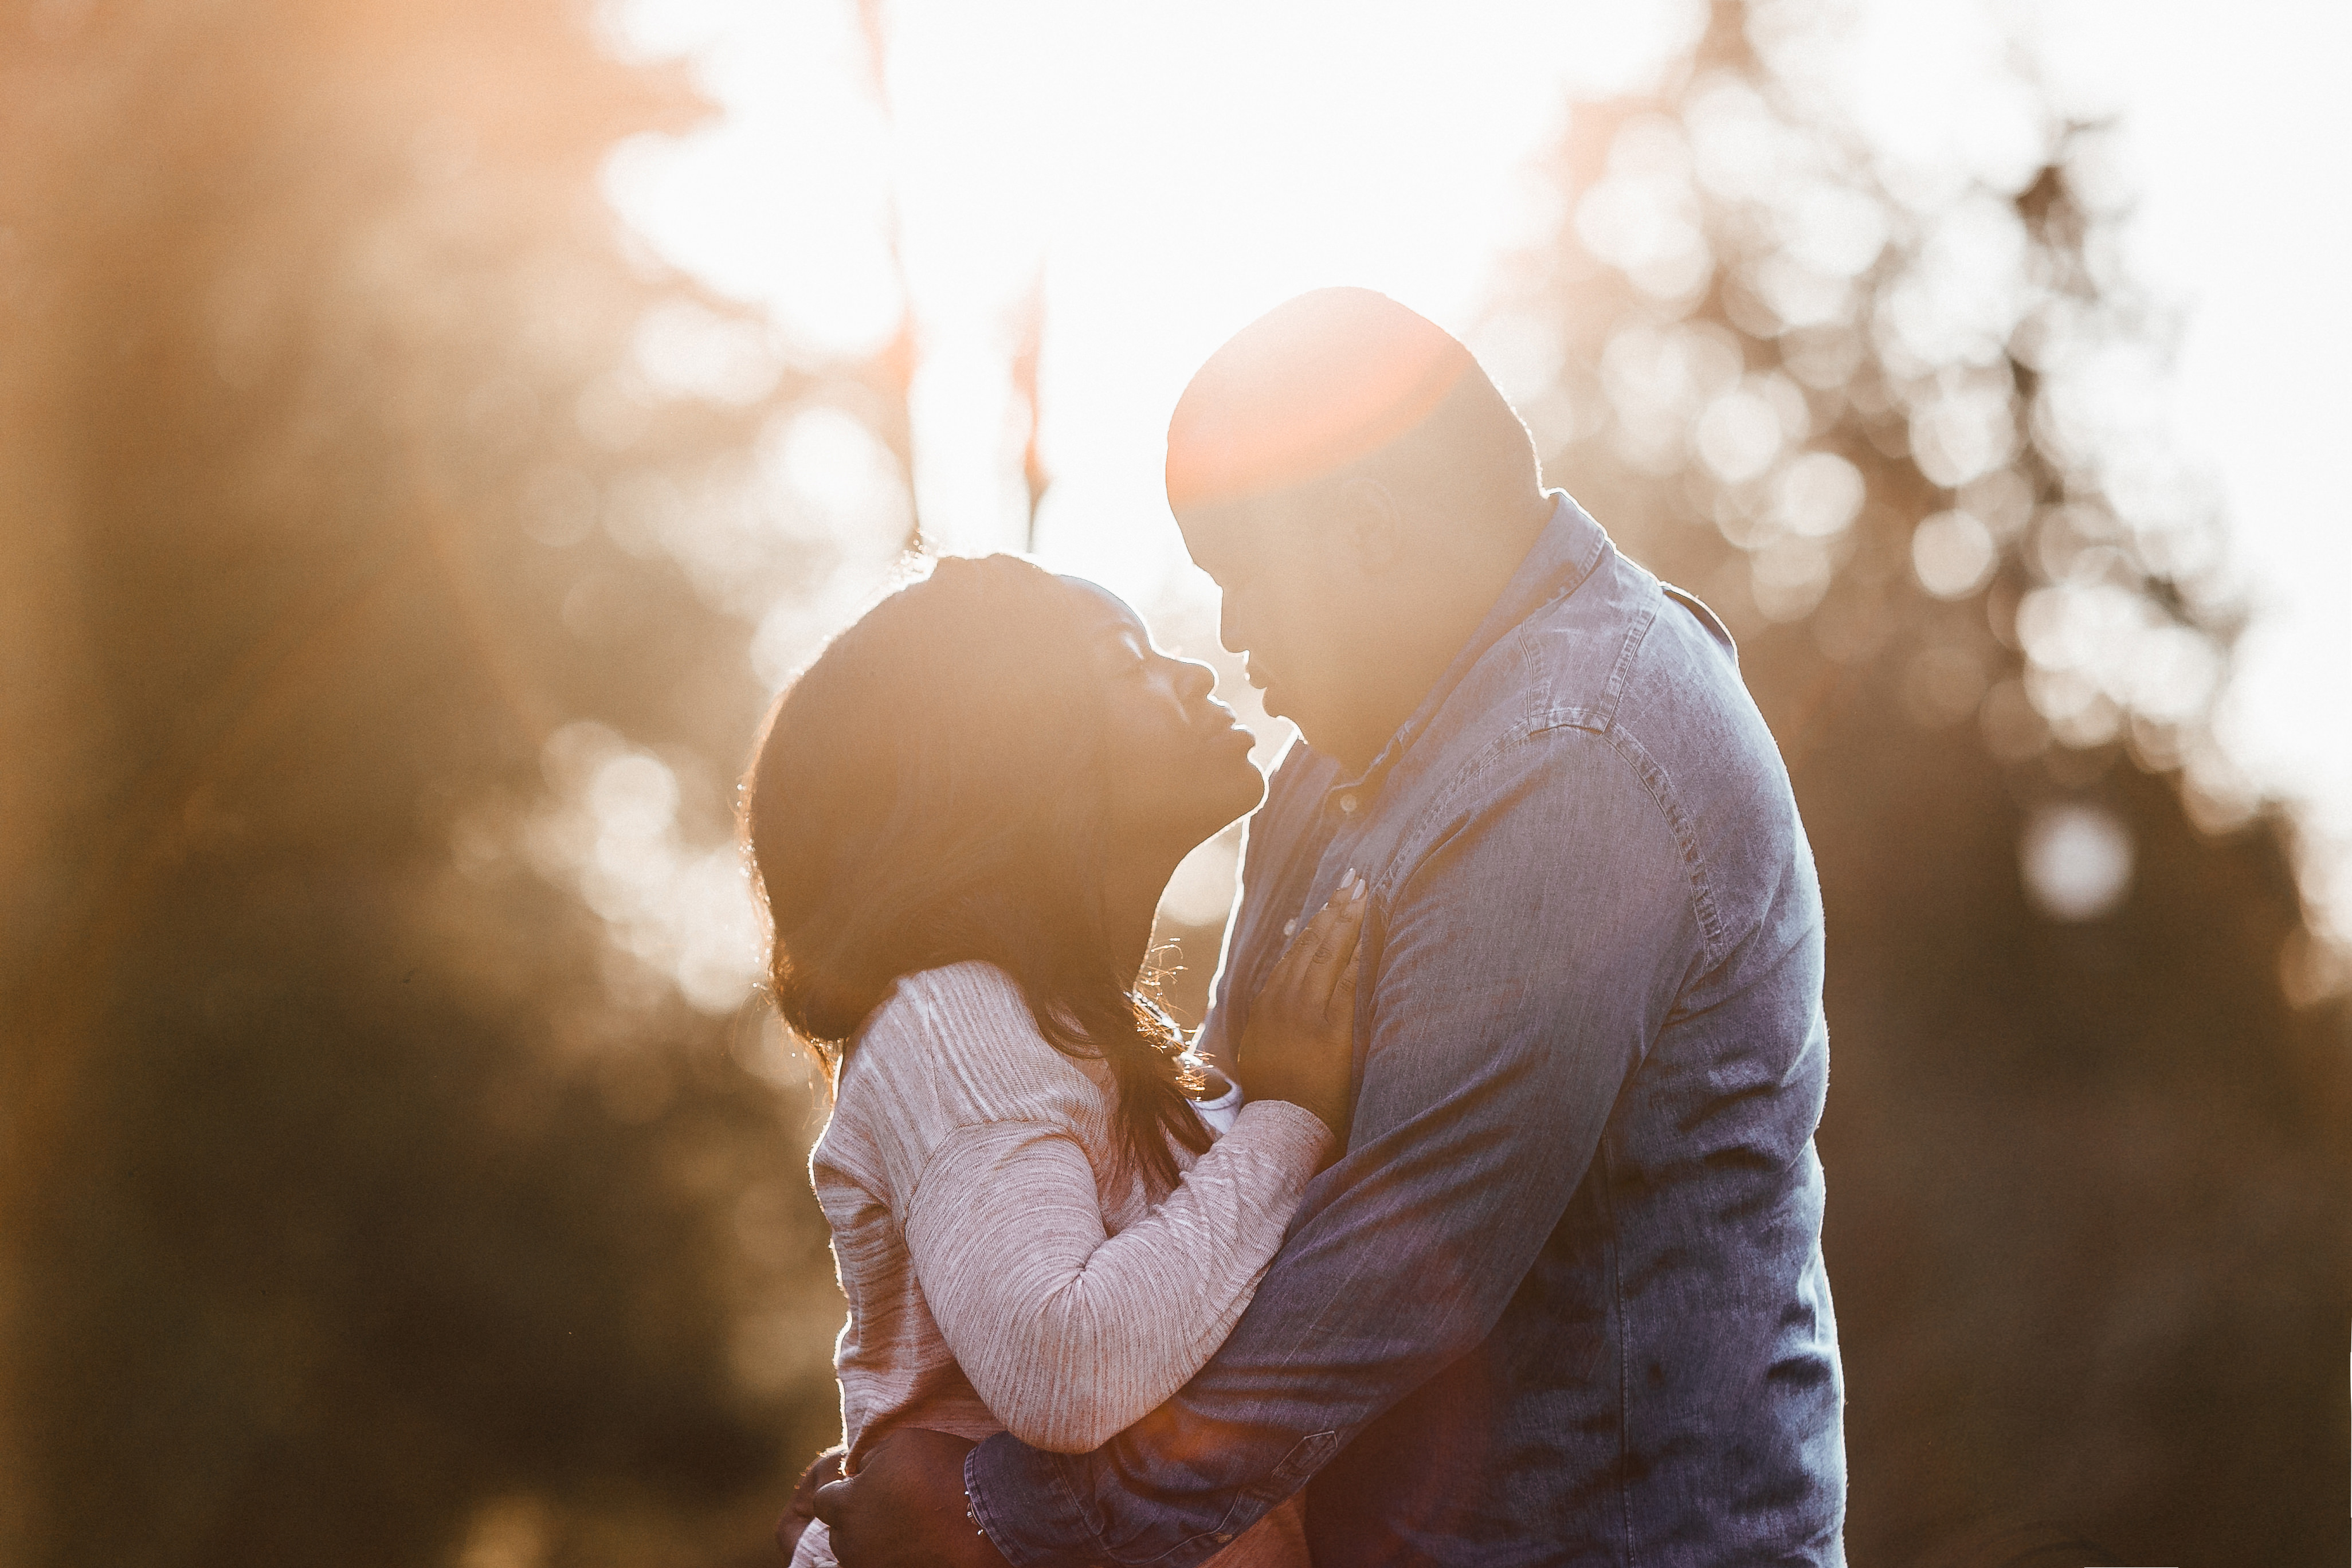 sunset and sunrise engagement shoot at victoria park in bath uk by somerset wedding photographer beatrici